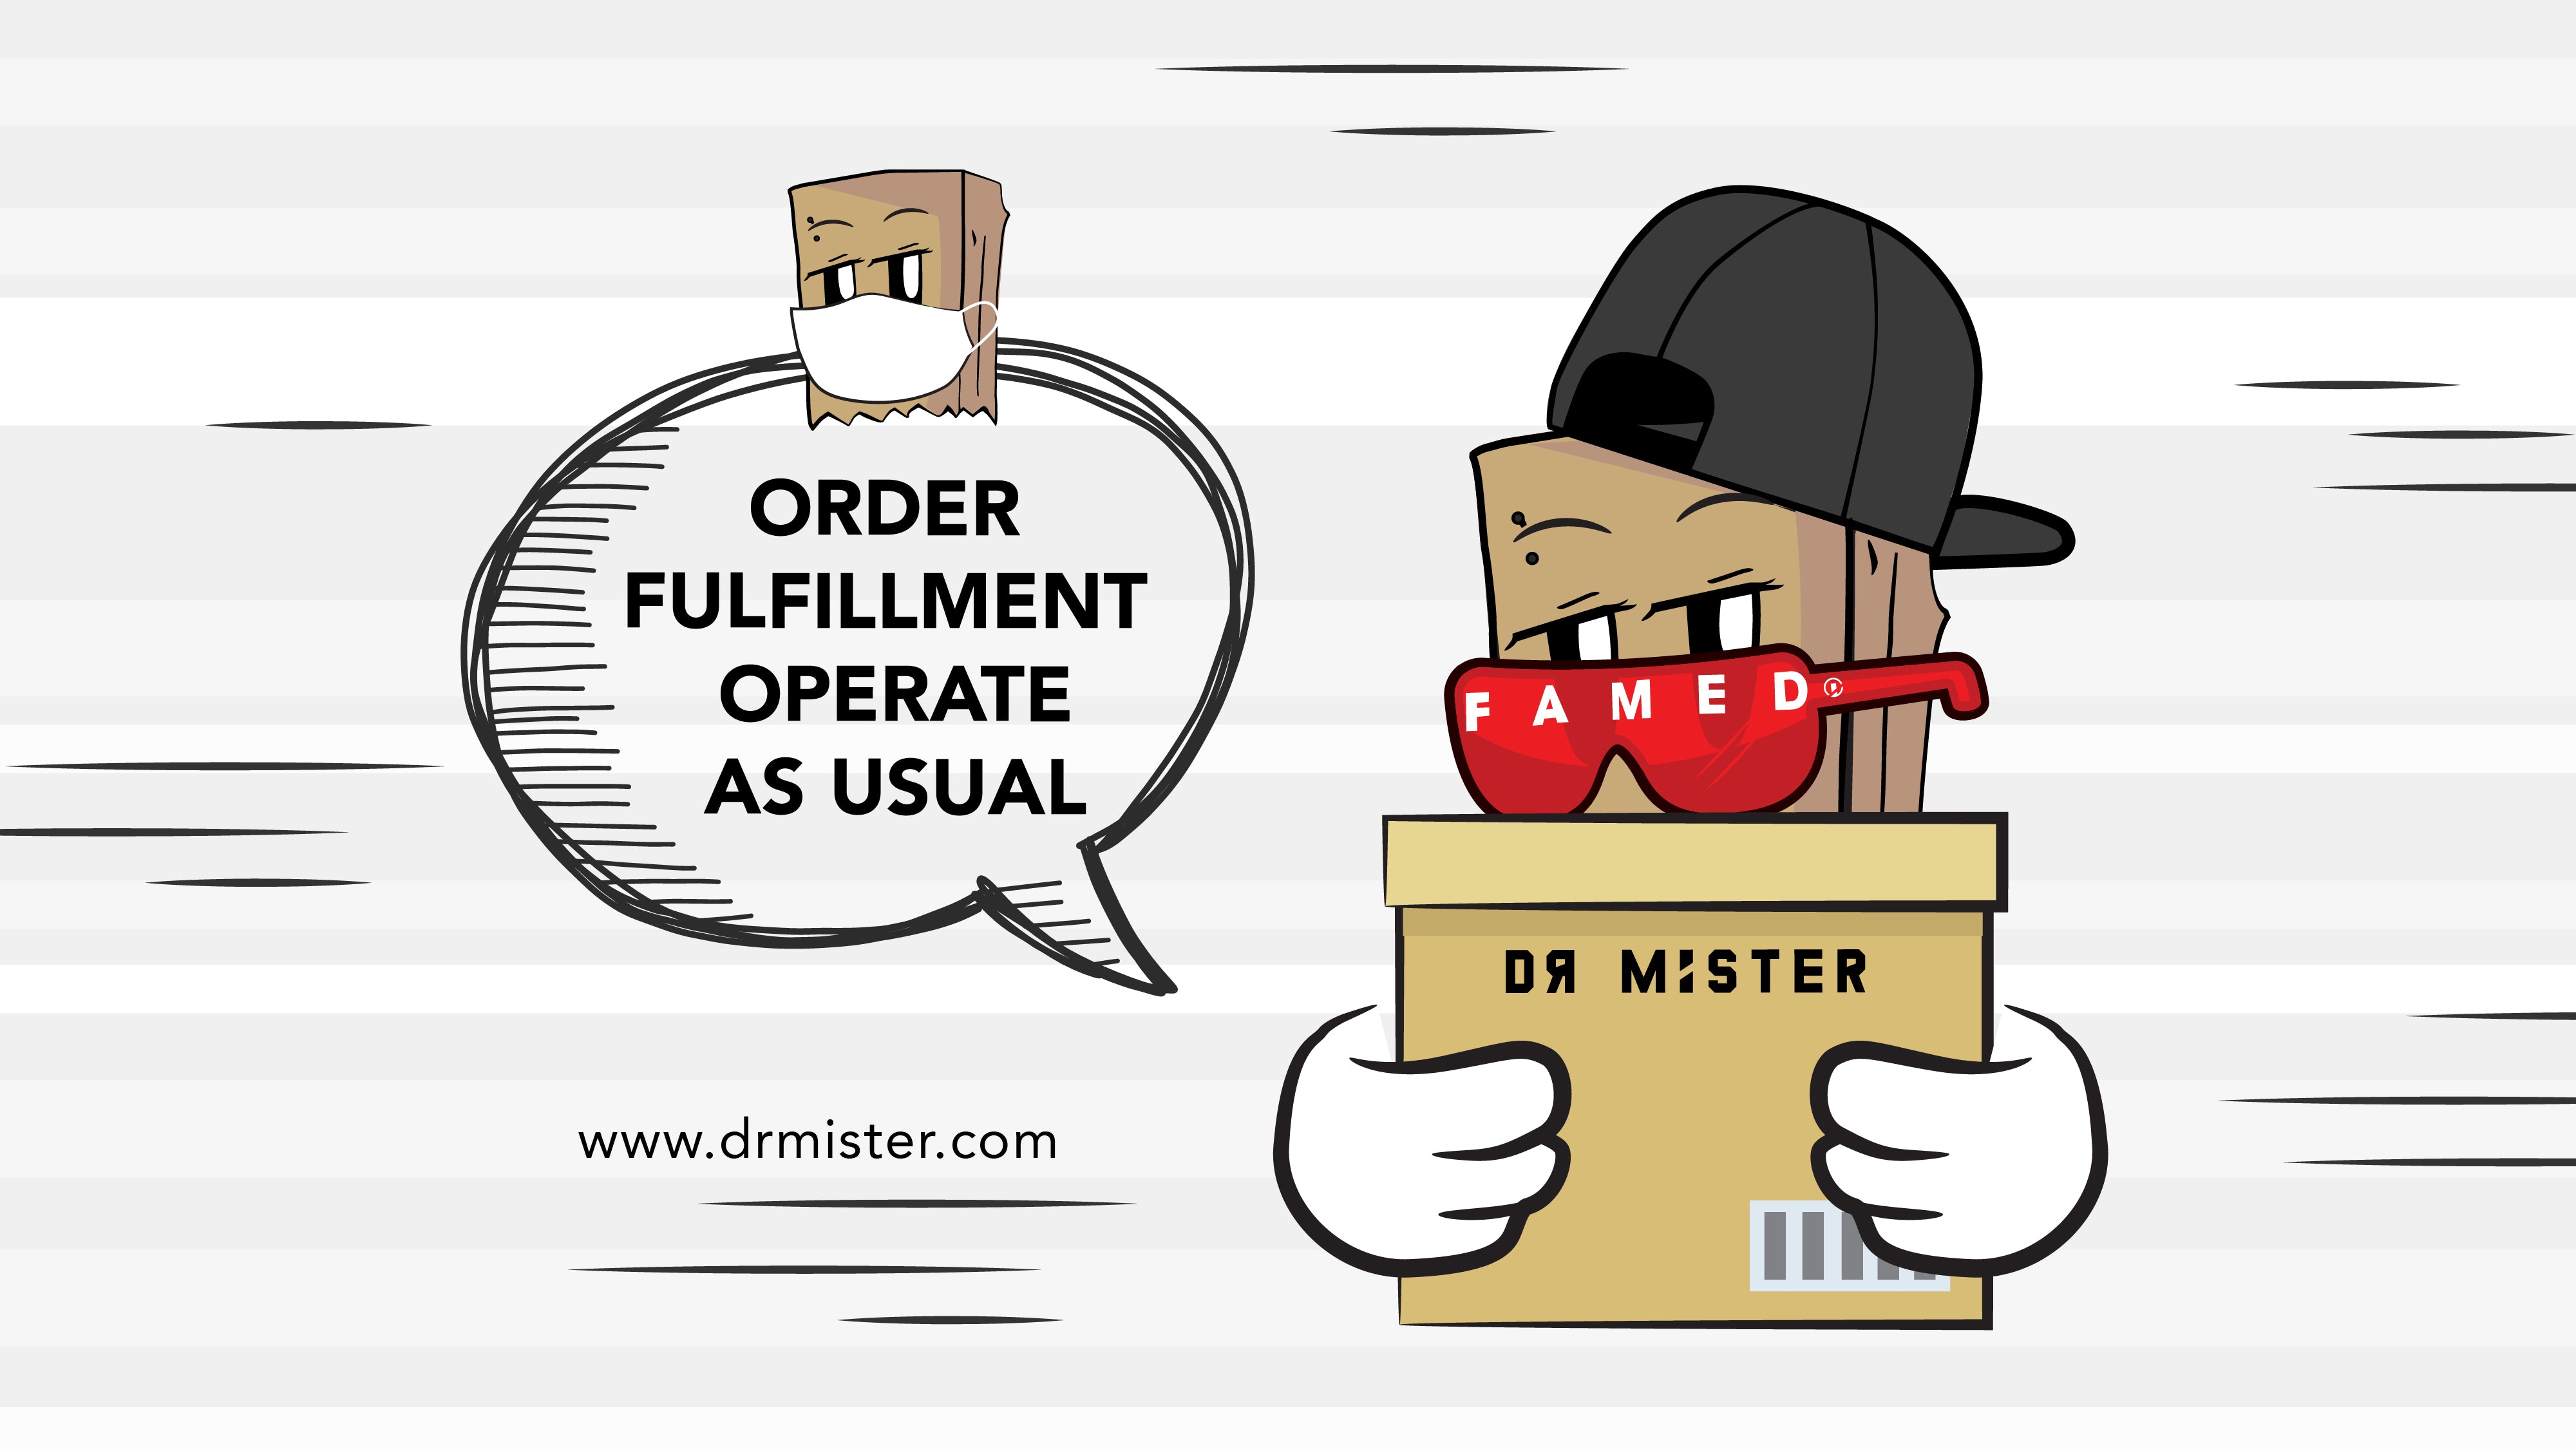 Movement Control Order - Online Order Fulfillment Operates as Usual